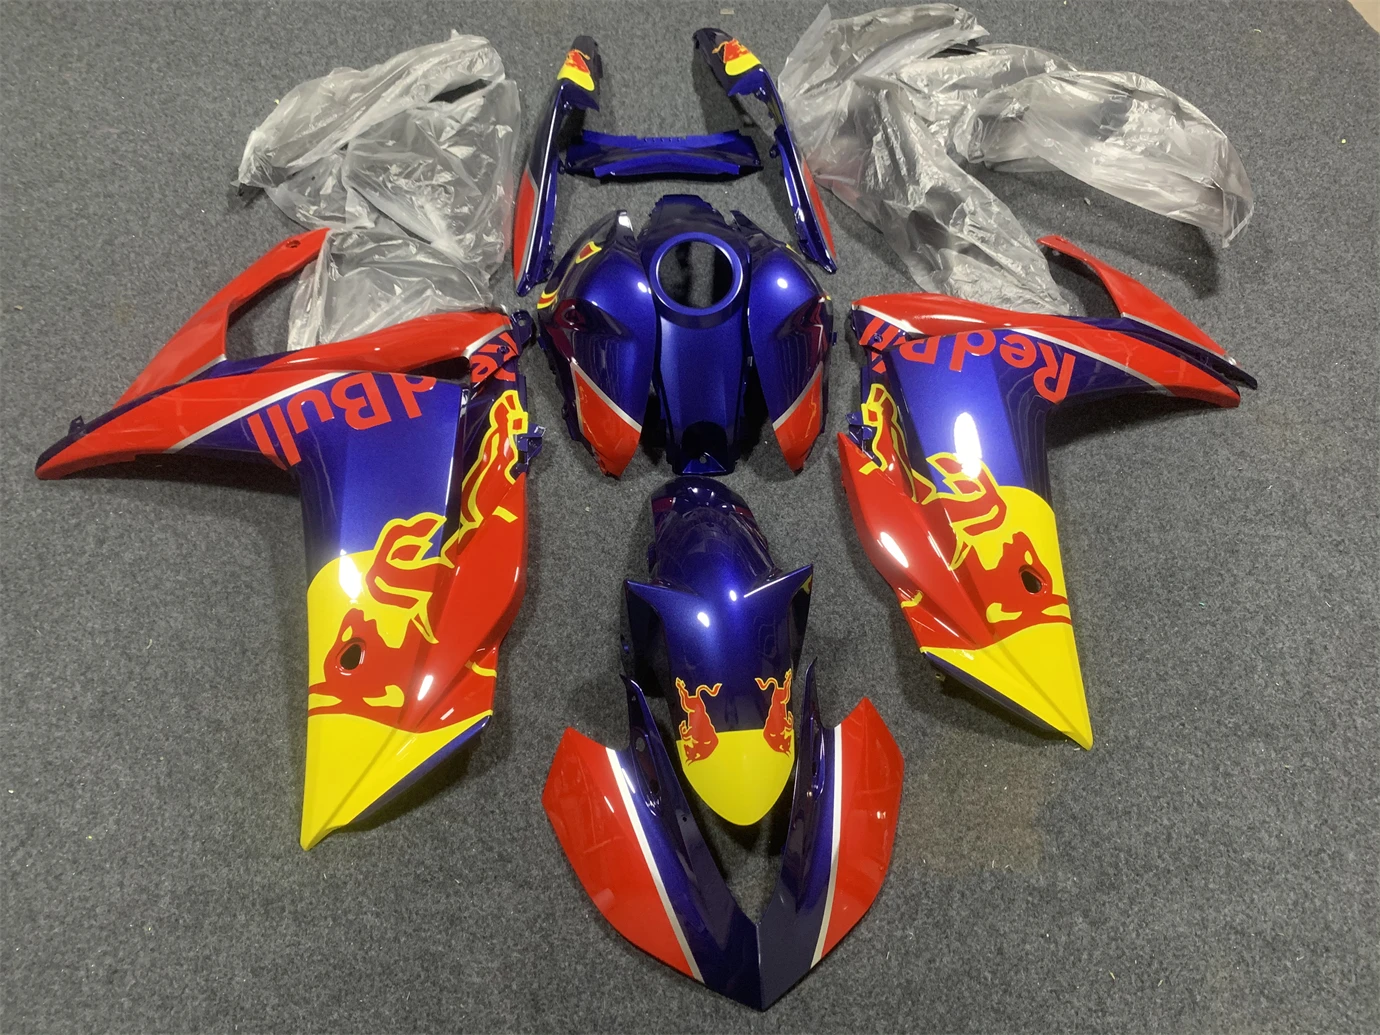 

Motorcycle Whole Body Fairing Suitable for Yamaha R25 15-18 years R3 2015 2016 2017 2018 Deflector hood Blue Red